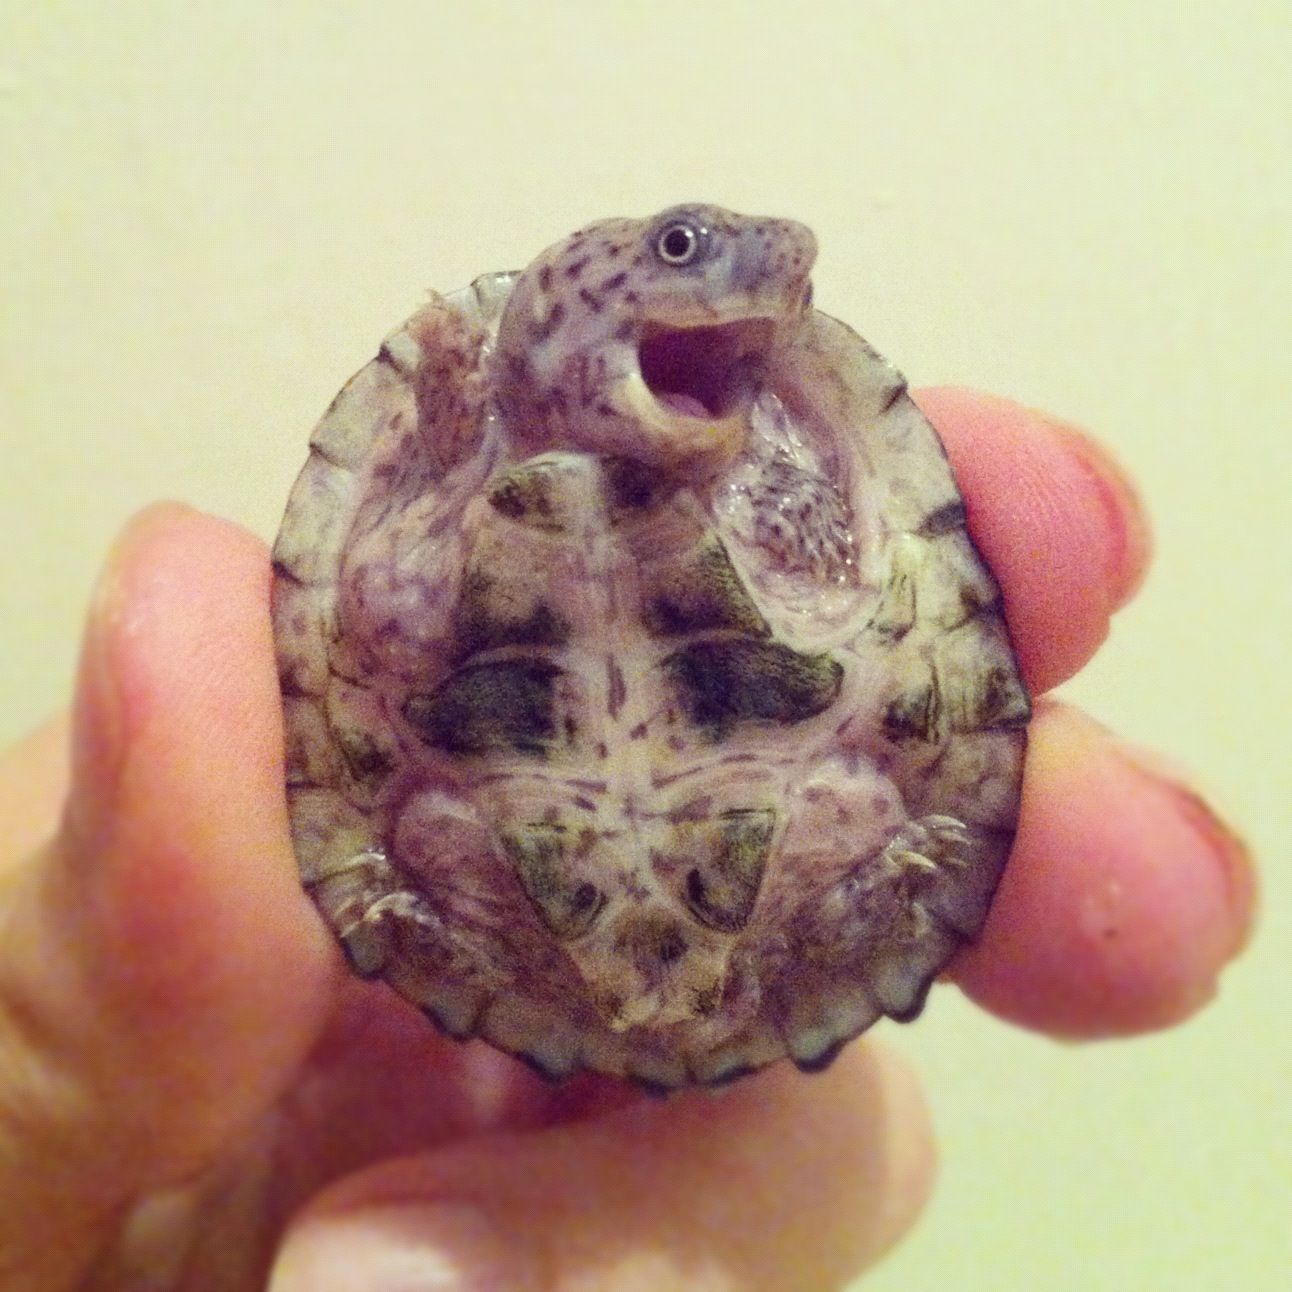 Cute Turtle Pictures